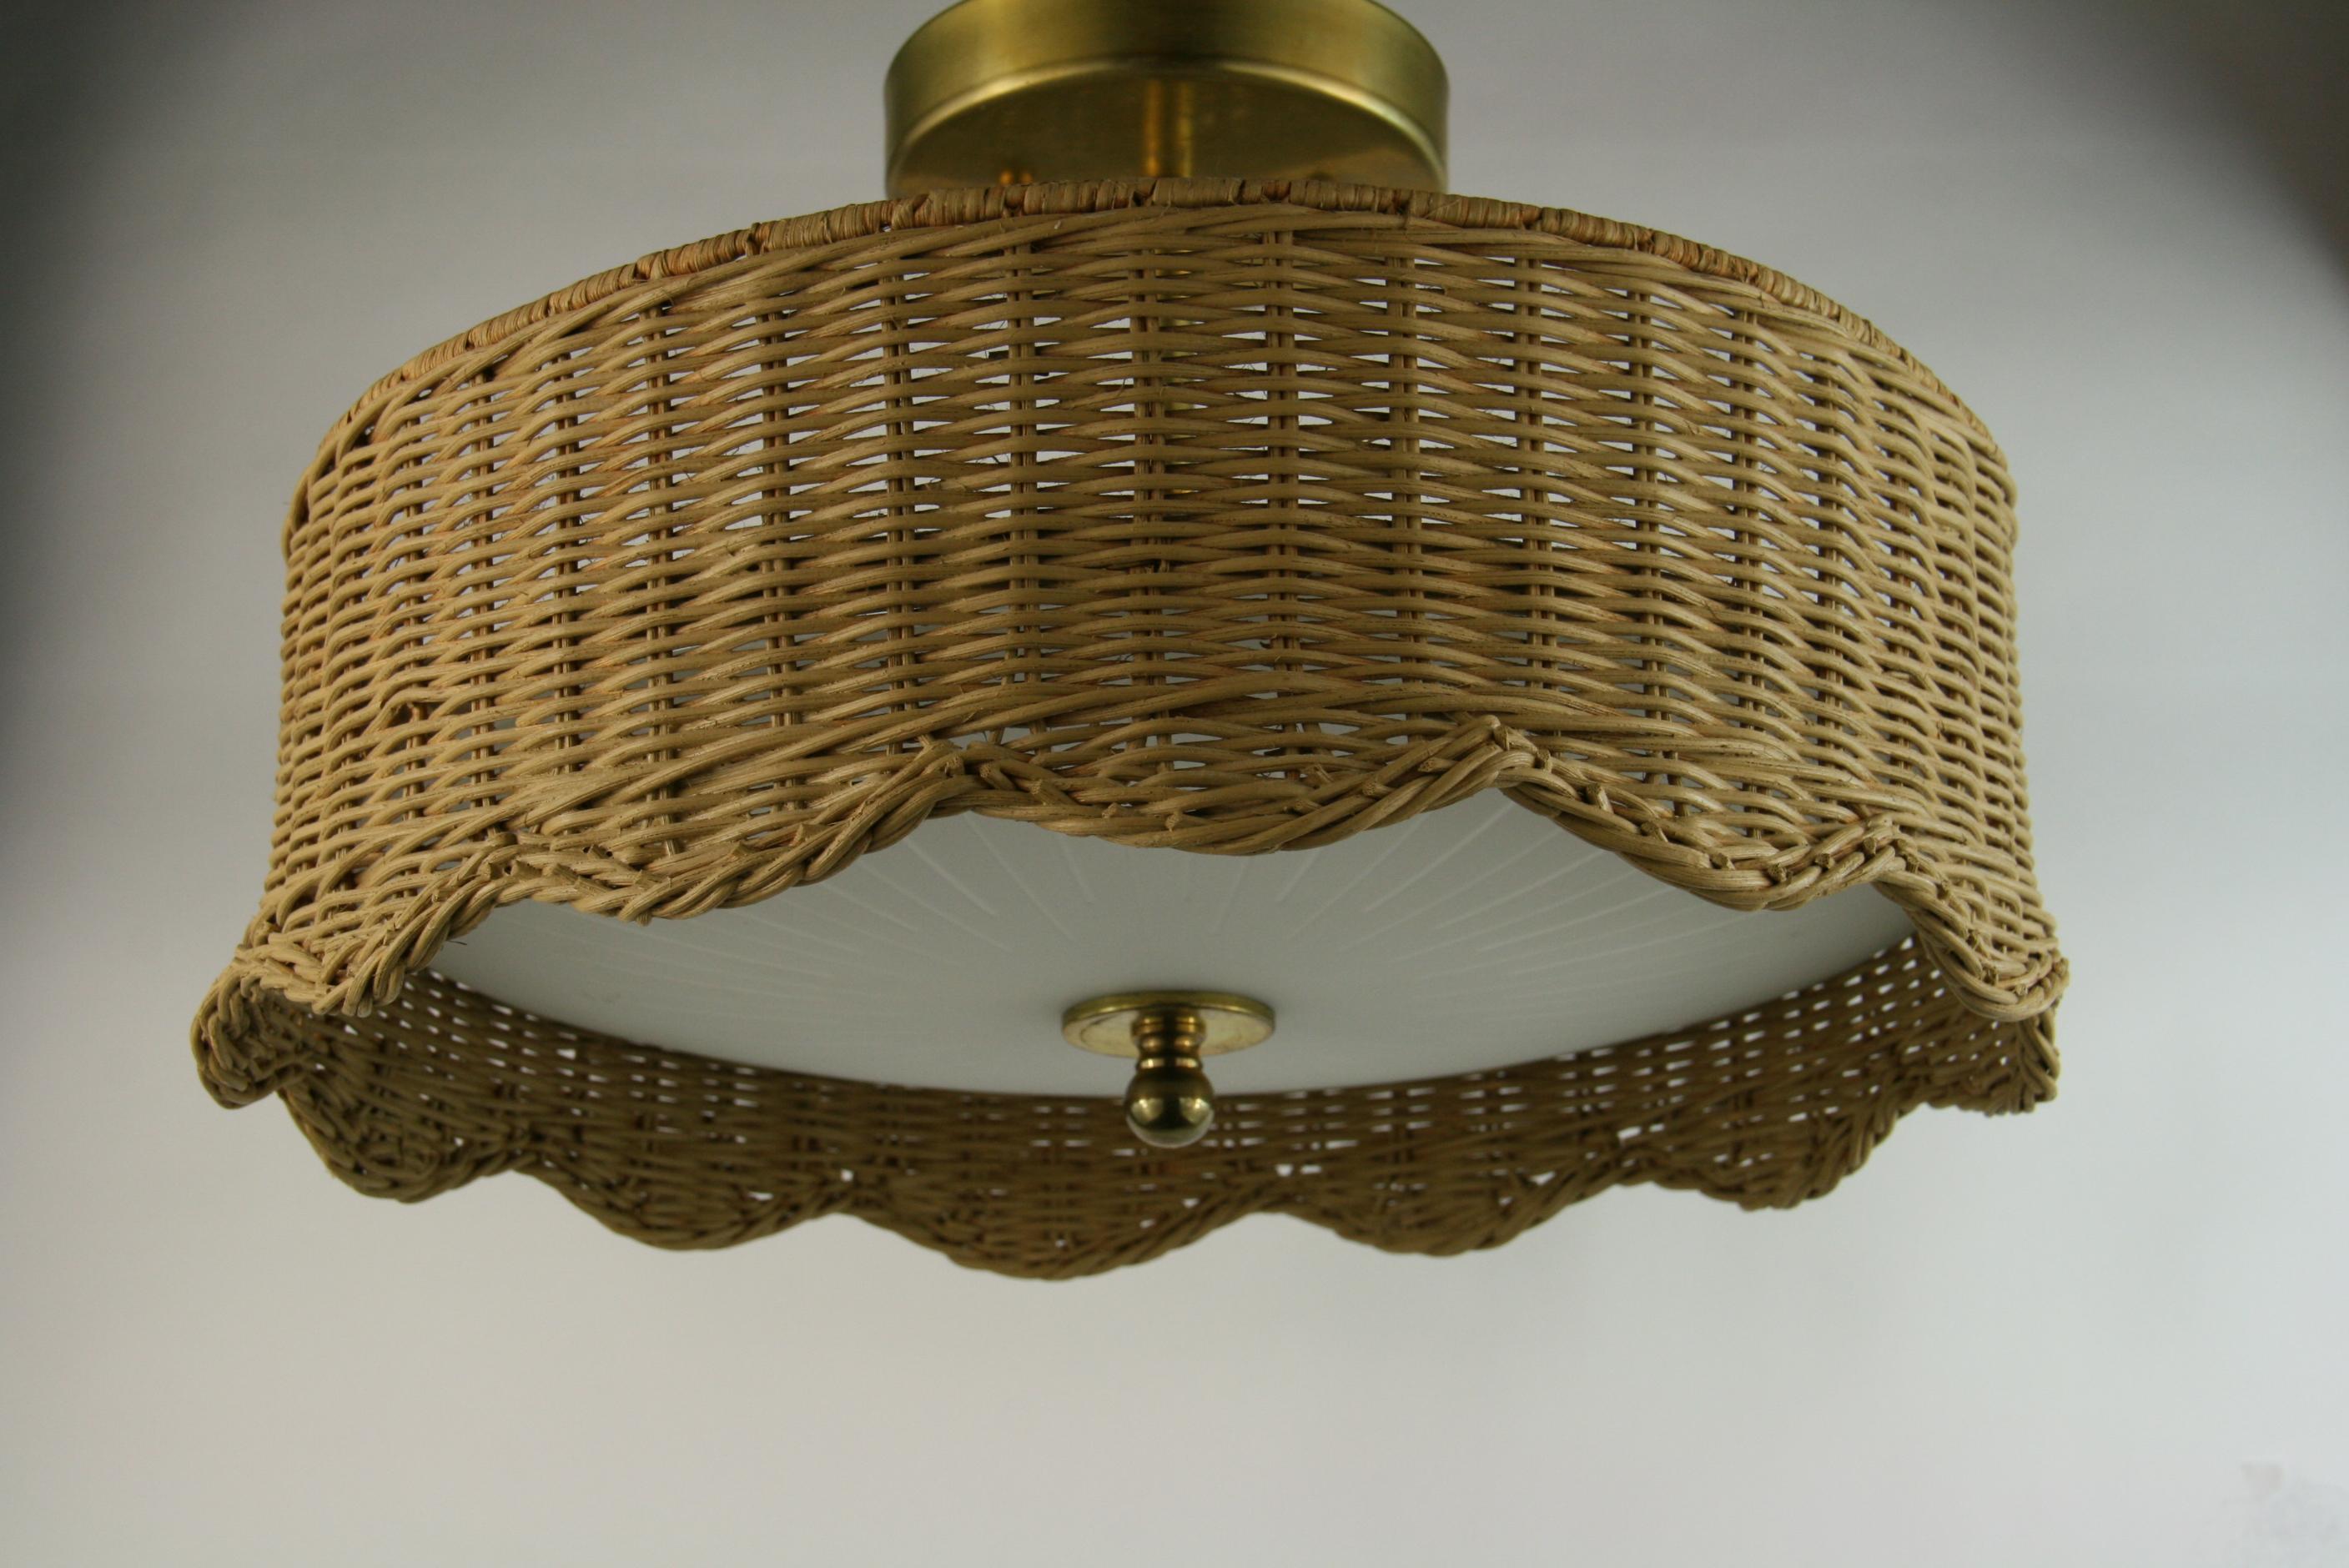 8-277 Rattan wicker and glass semi flush mount. Frosted glass with radial clear glass from center.
Takes 3 60 watt Edison based bulbs.
 